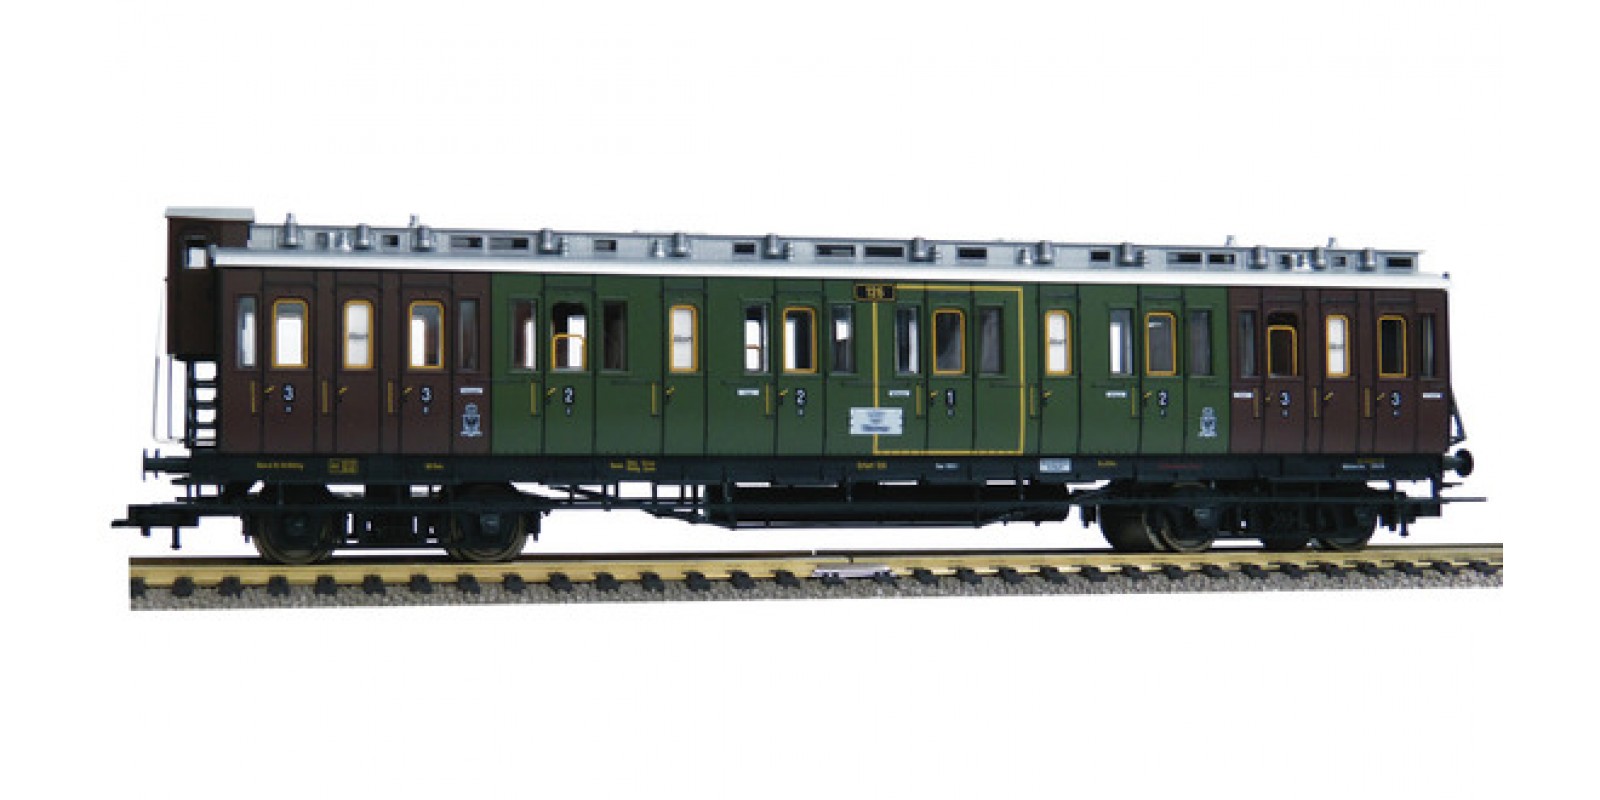 FL568901 - 4-axle 1st/2nd/3rd class compartment car with brakeman's cab type ABCC, K.P.E.V.